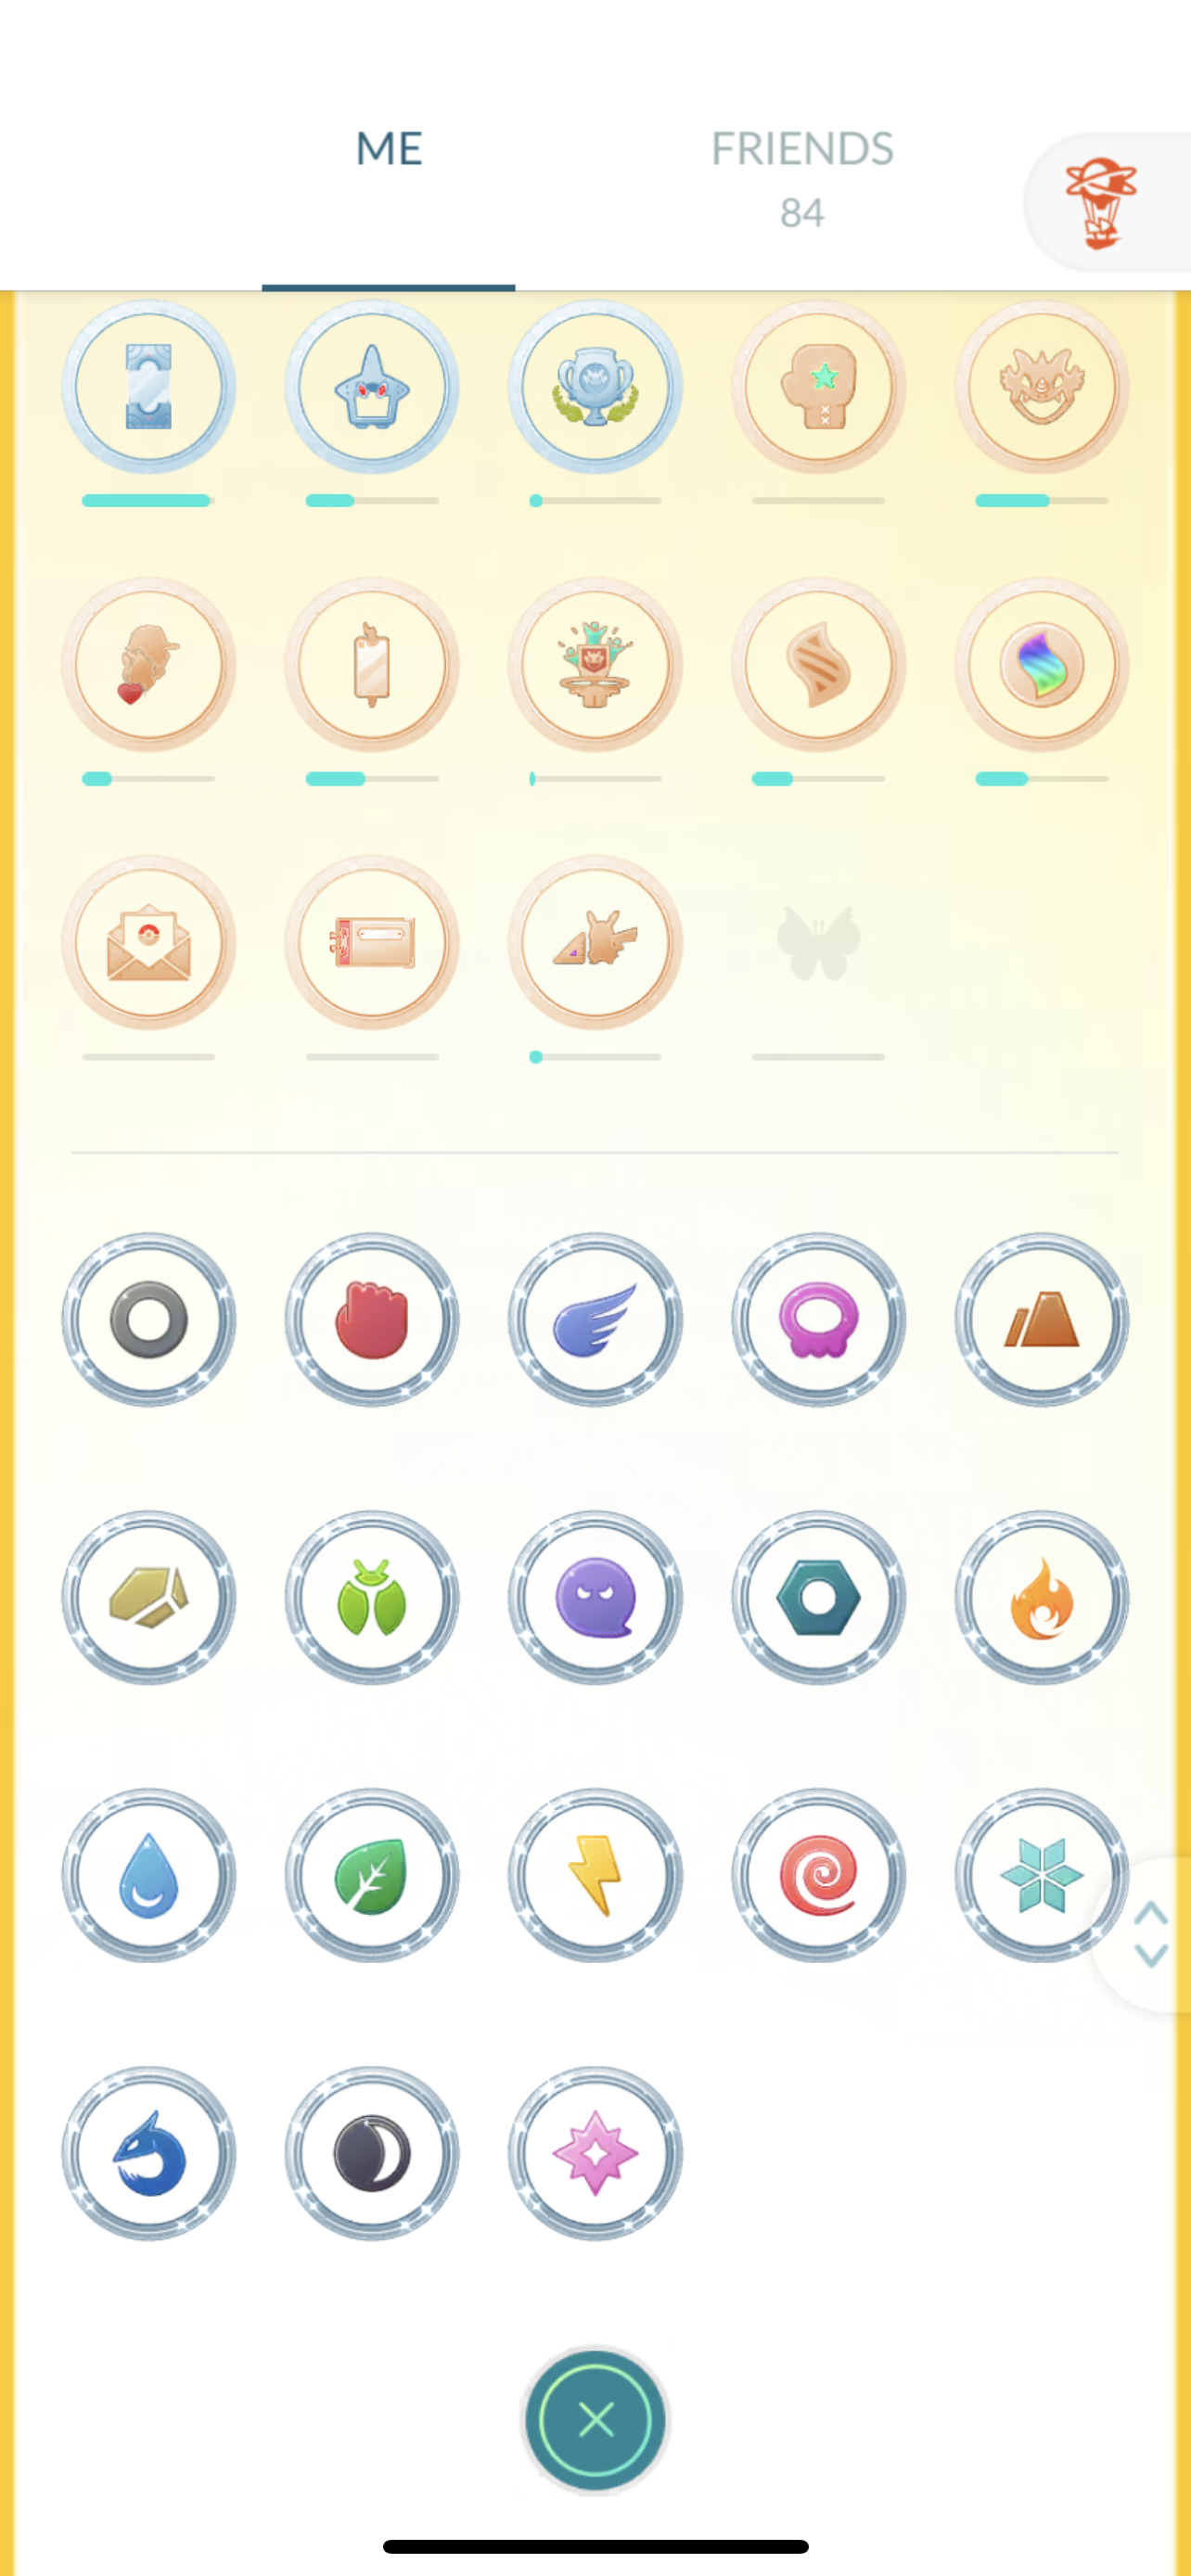 Level 50 pokemon go account for sale. Interested PM. I accept offers. :  r/PokemonGoTrade